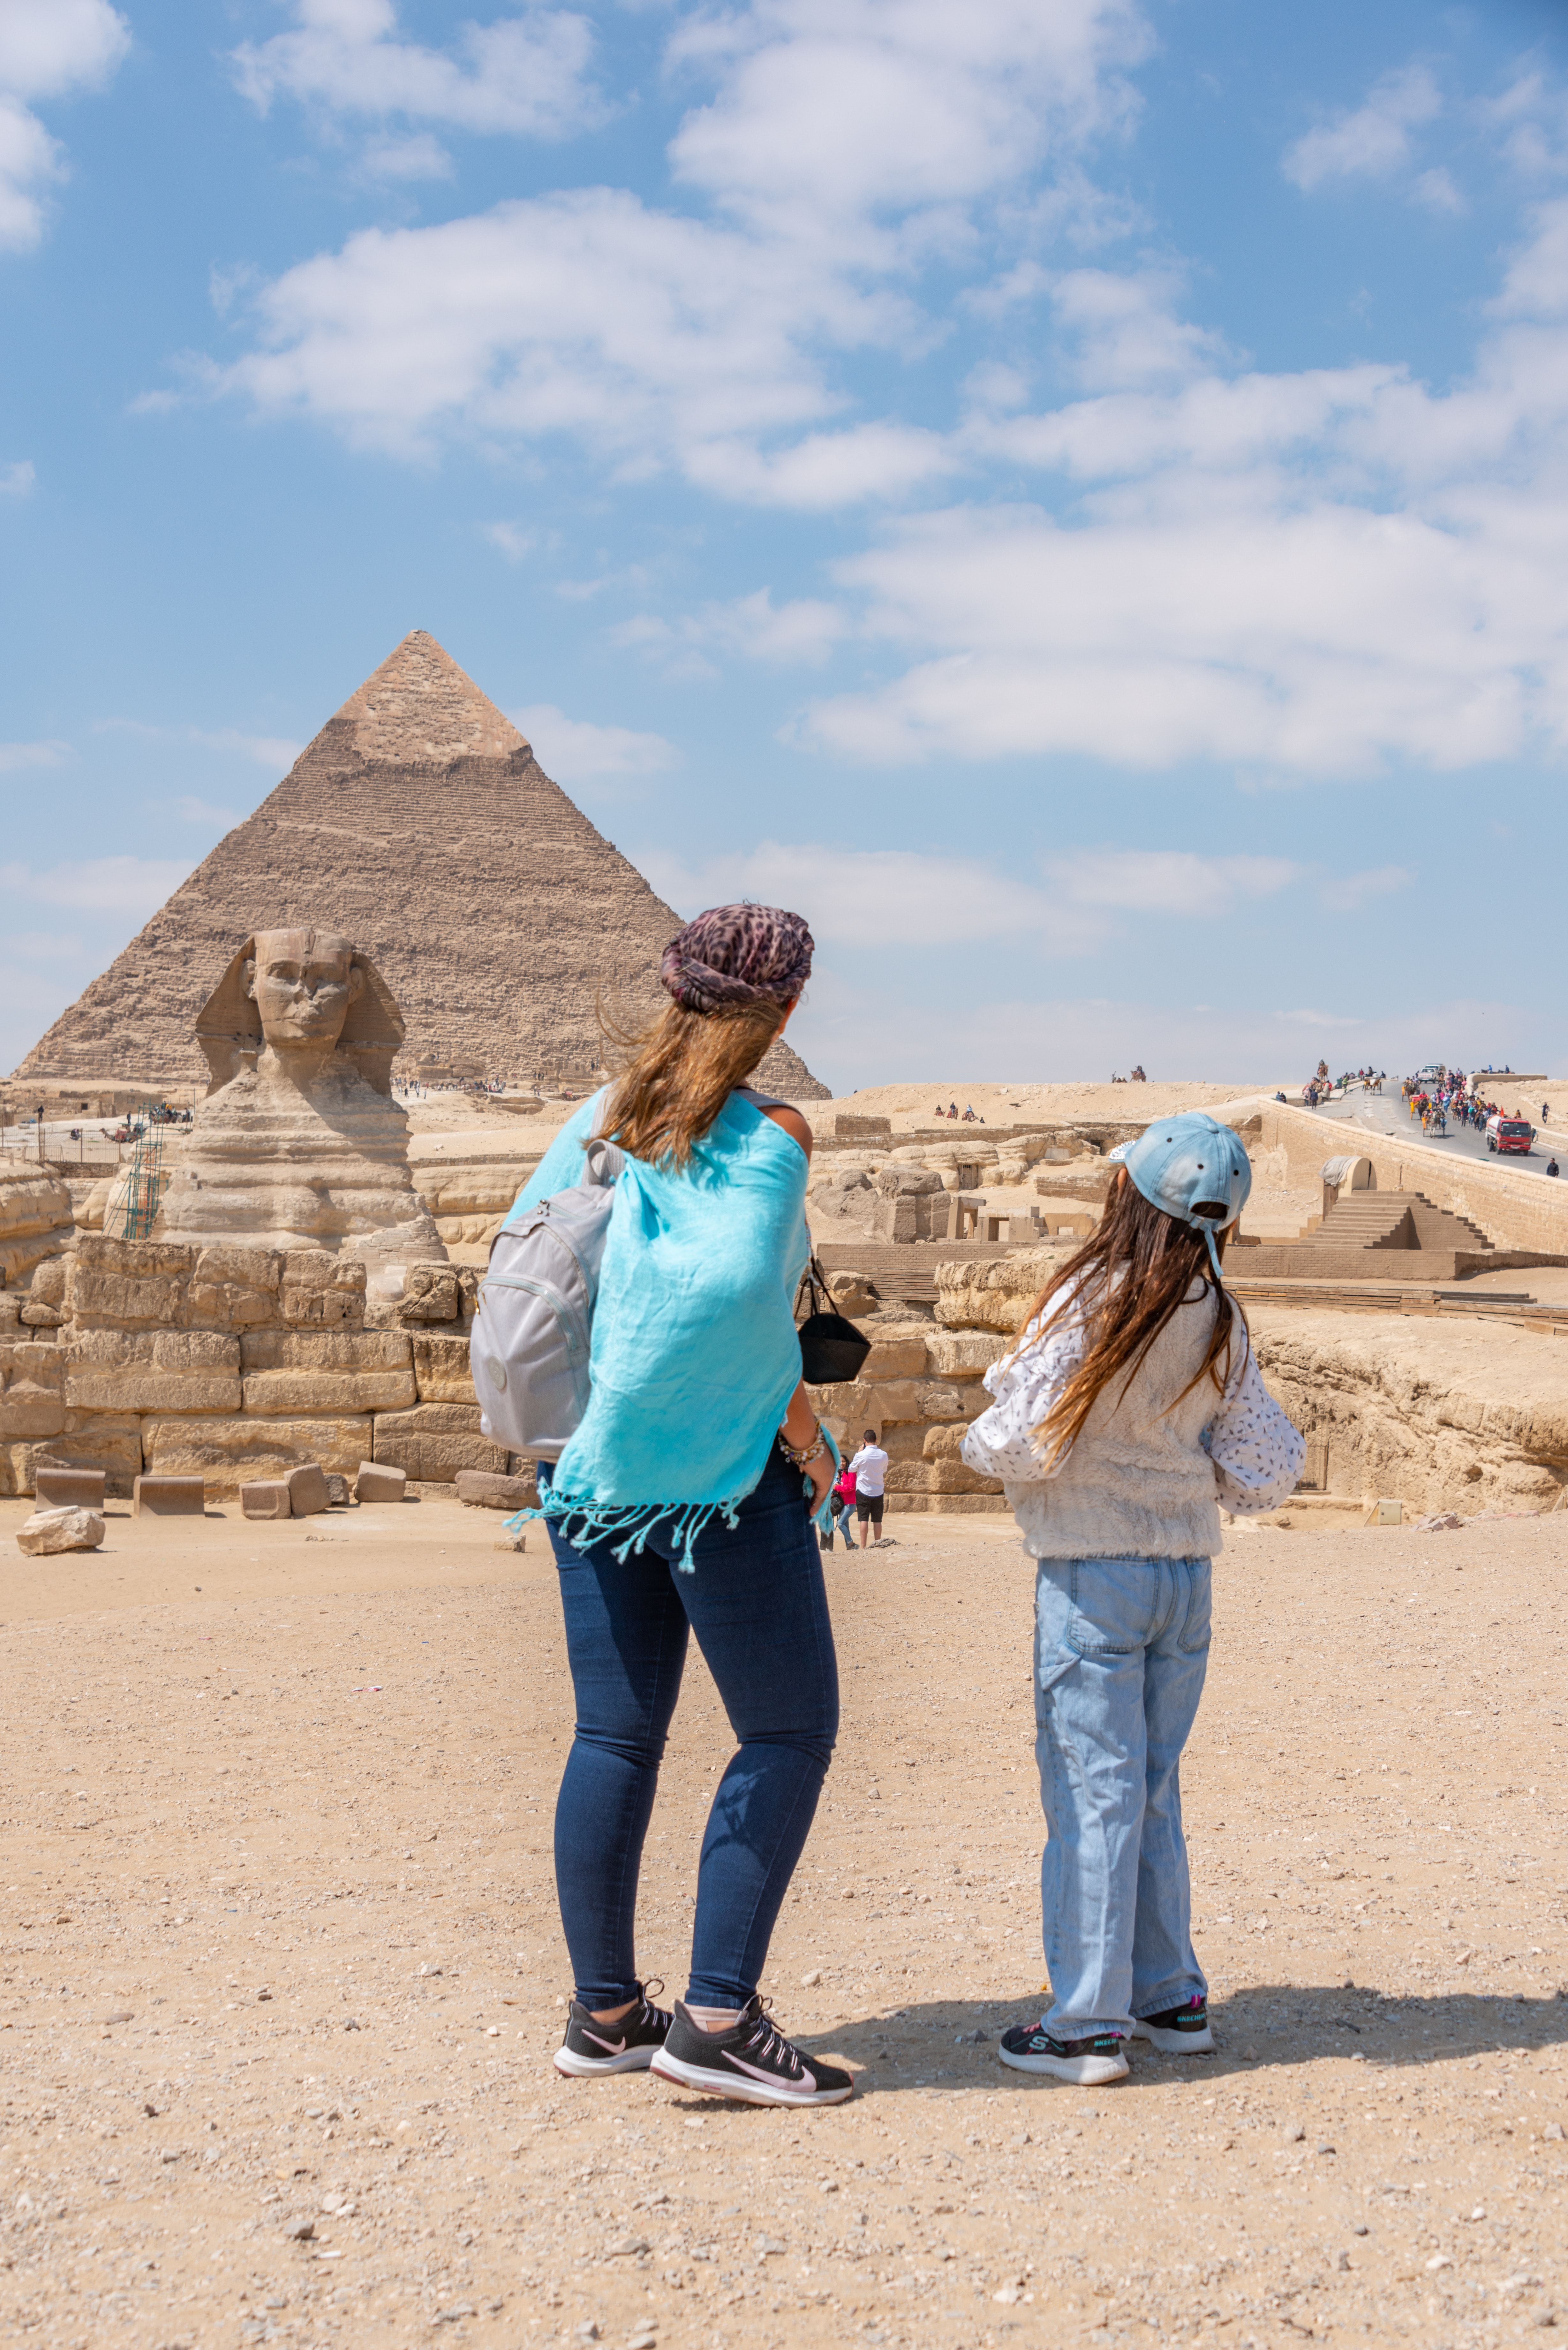 Egypt Vacation Packages - Pyramids of Giza Tour